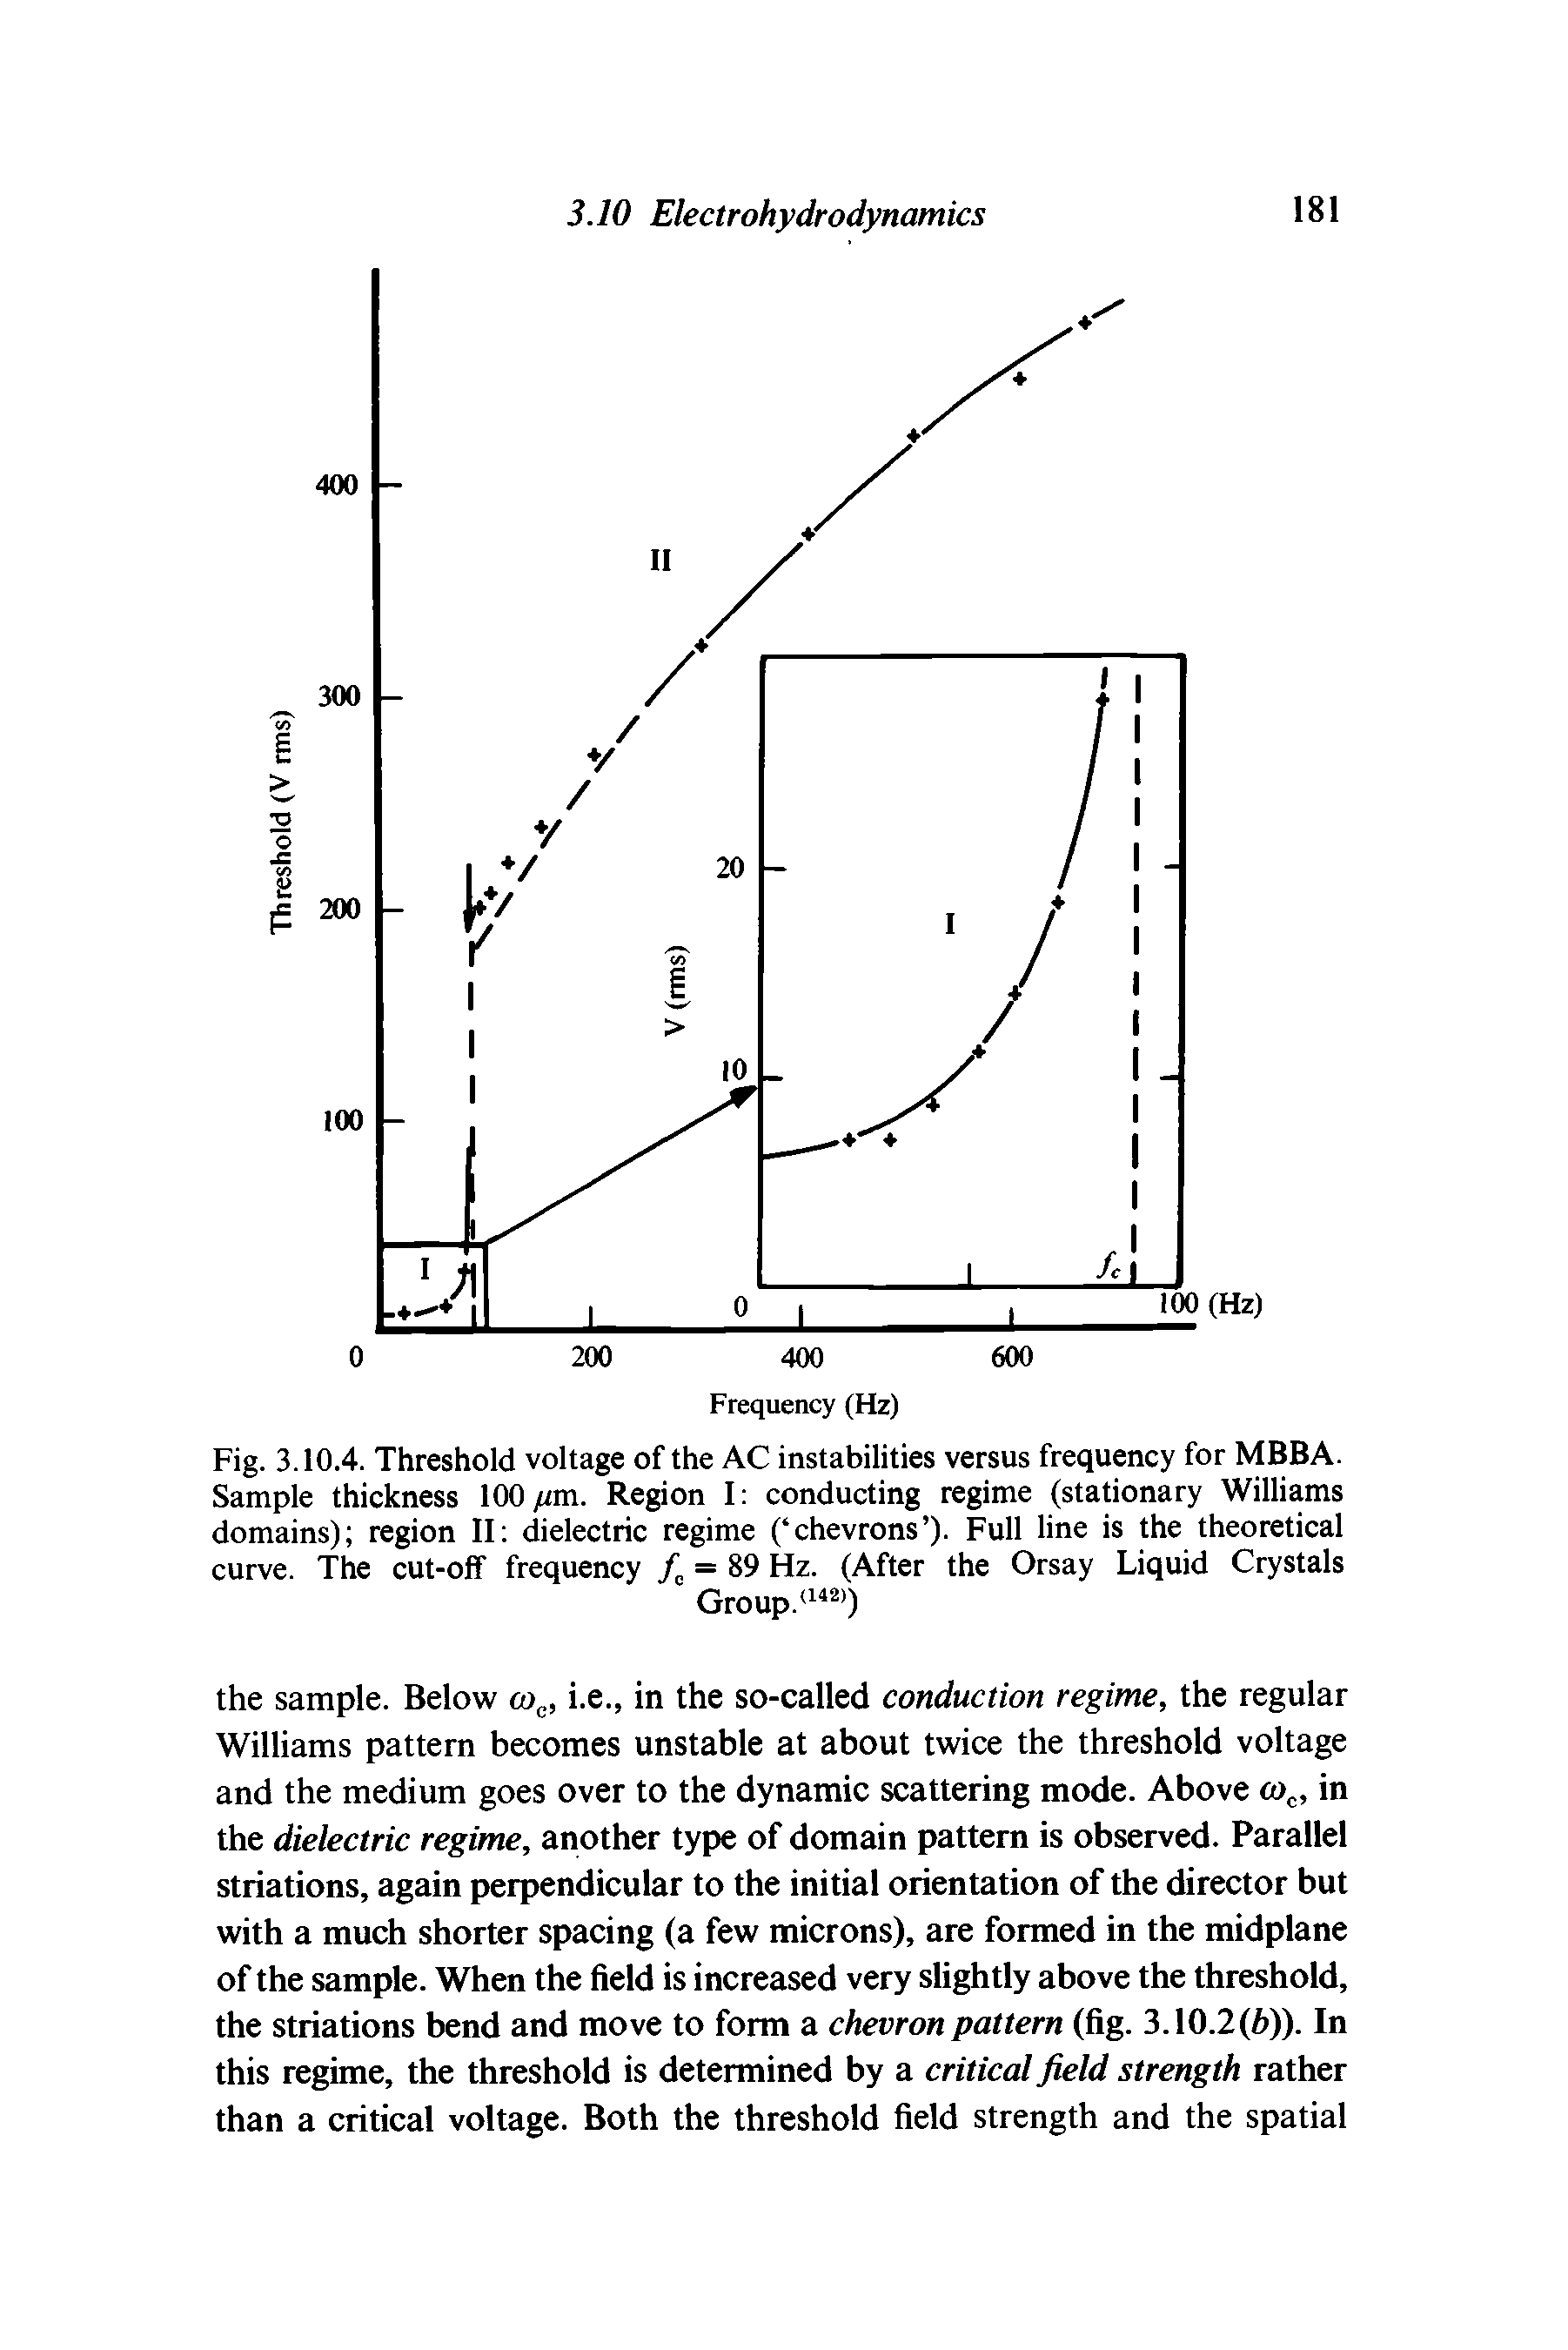 Fig. 3.10.4. Threshold voltage of the AC instabilities versus frequency for MBBA. Sample thickness 100 / m. Region I conducting regime (stationary Williams domains) region II dielectric regime ( chevrons ). Full line is the theoretical The cut-off frequency / = 89 Hz. (After the Orsay Liquid Crystals Group. )...